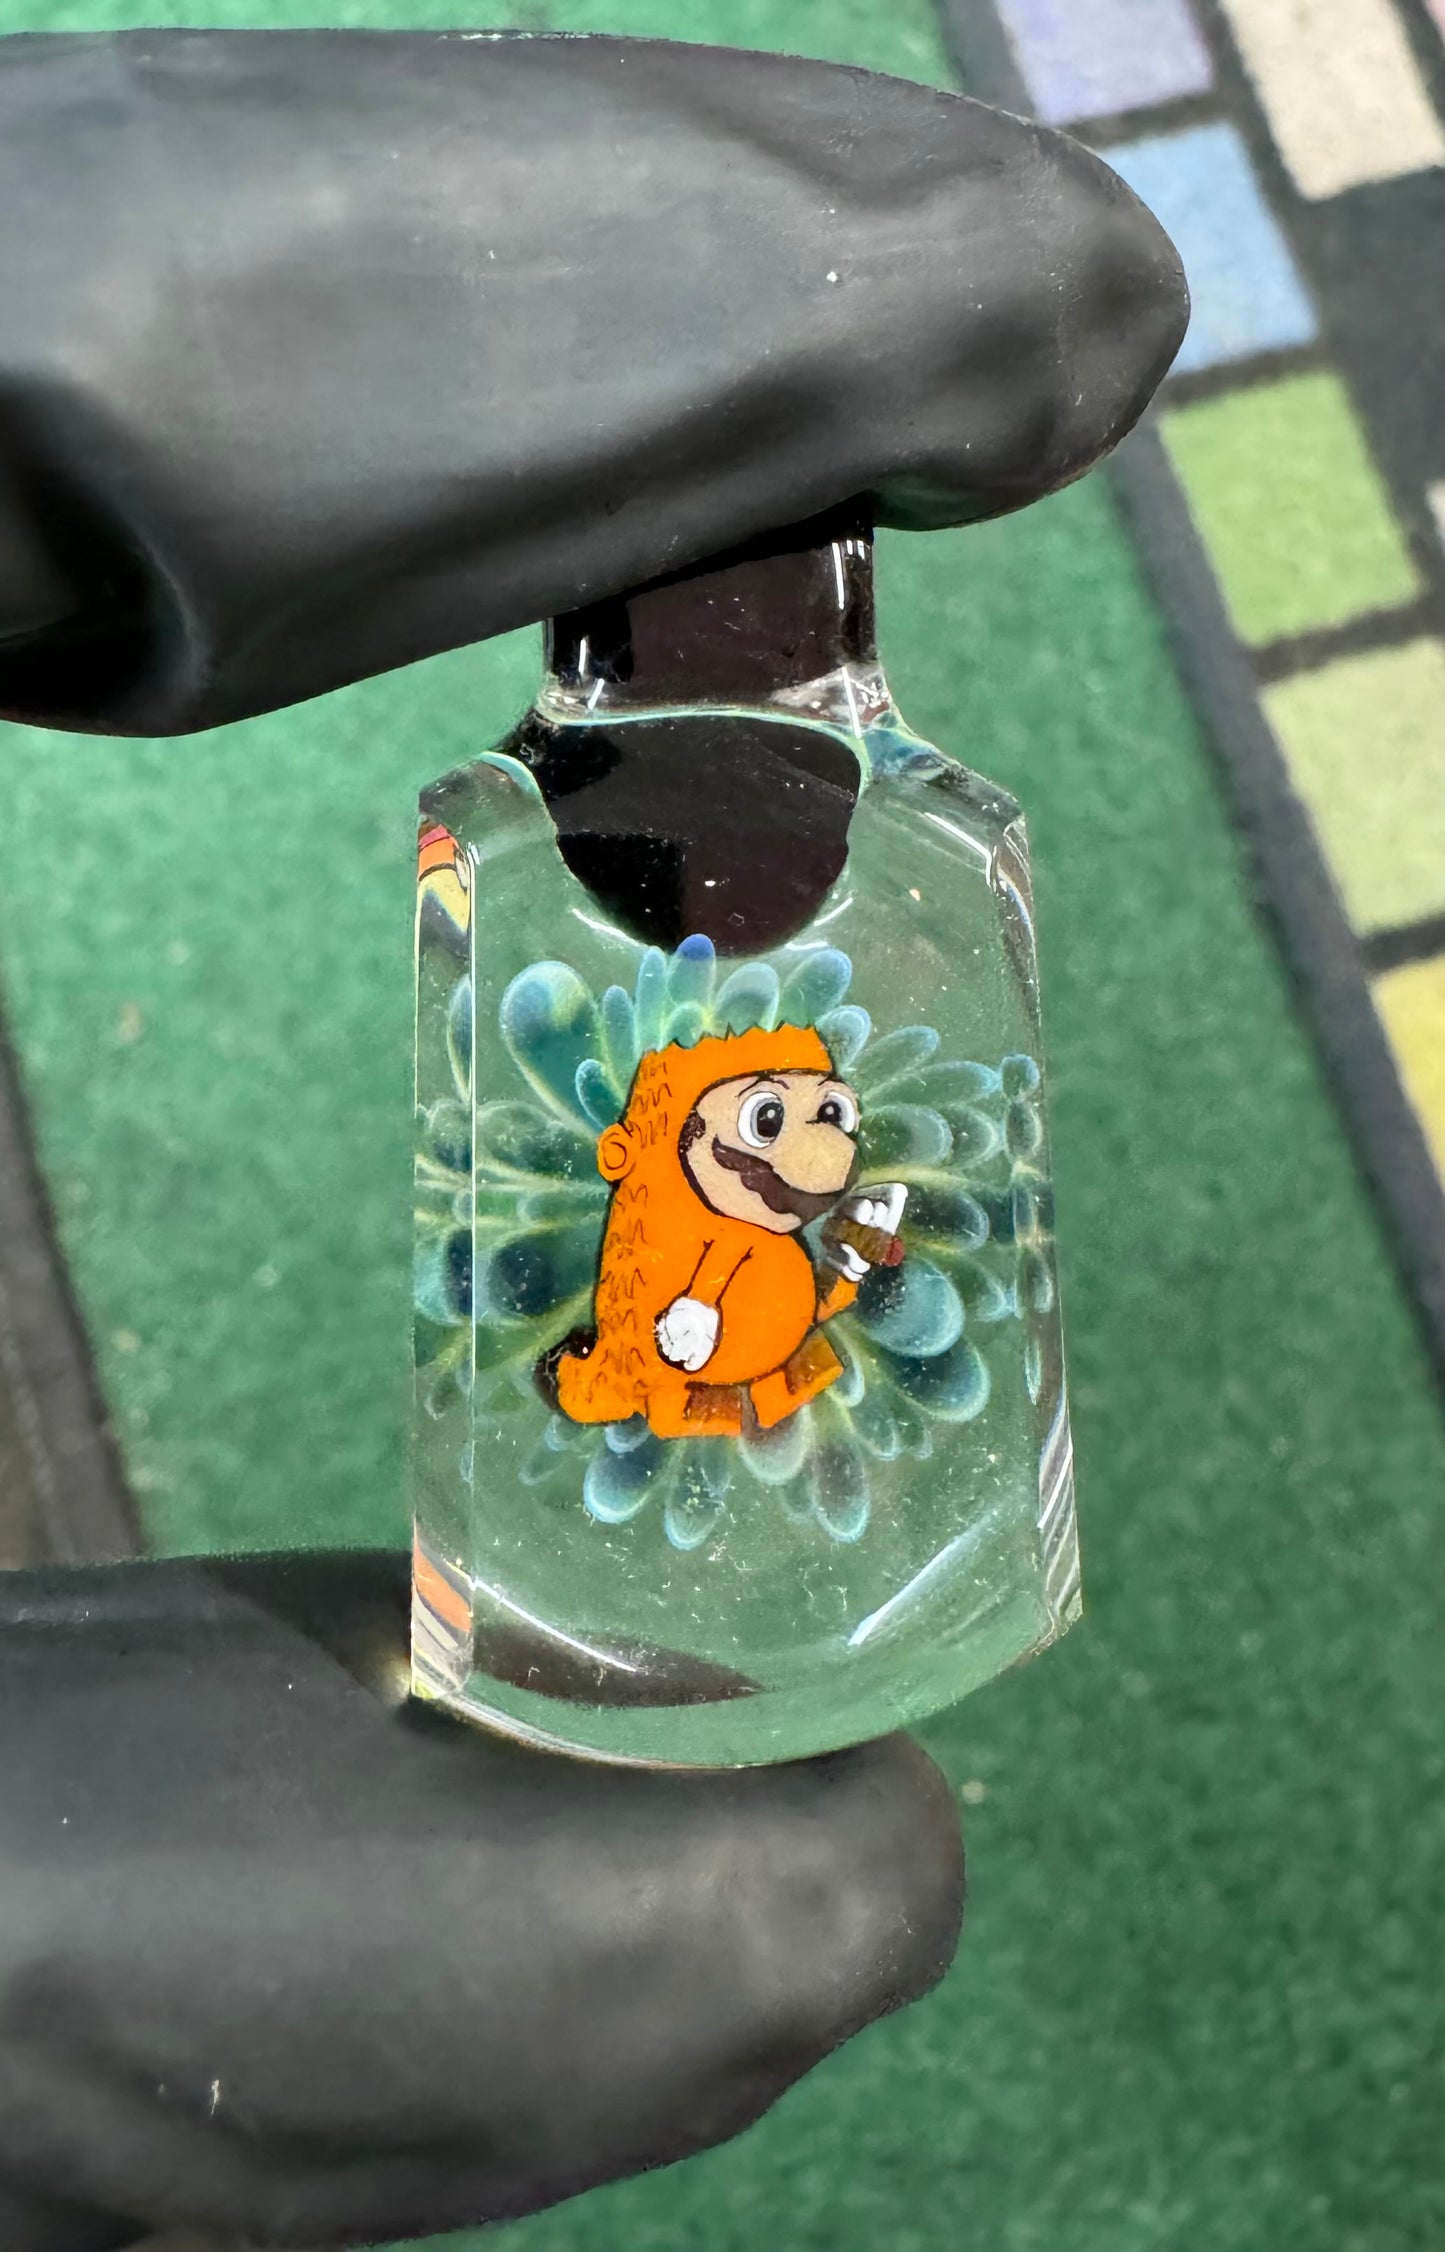 Bartfield Mario pendent made by Micro